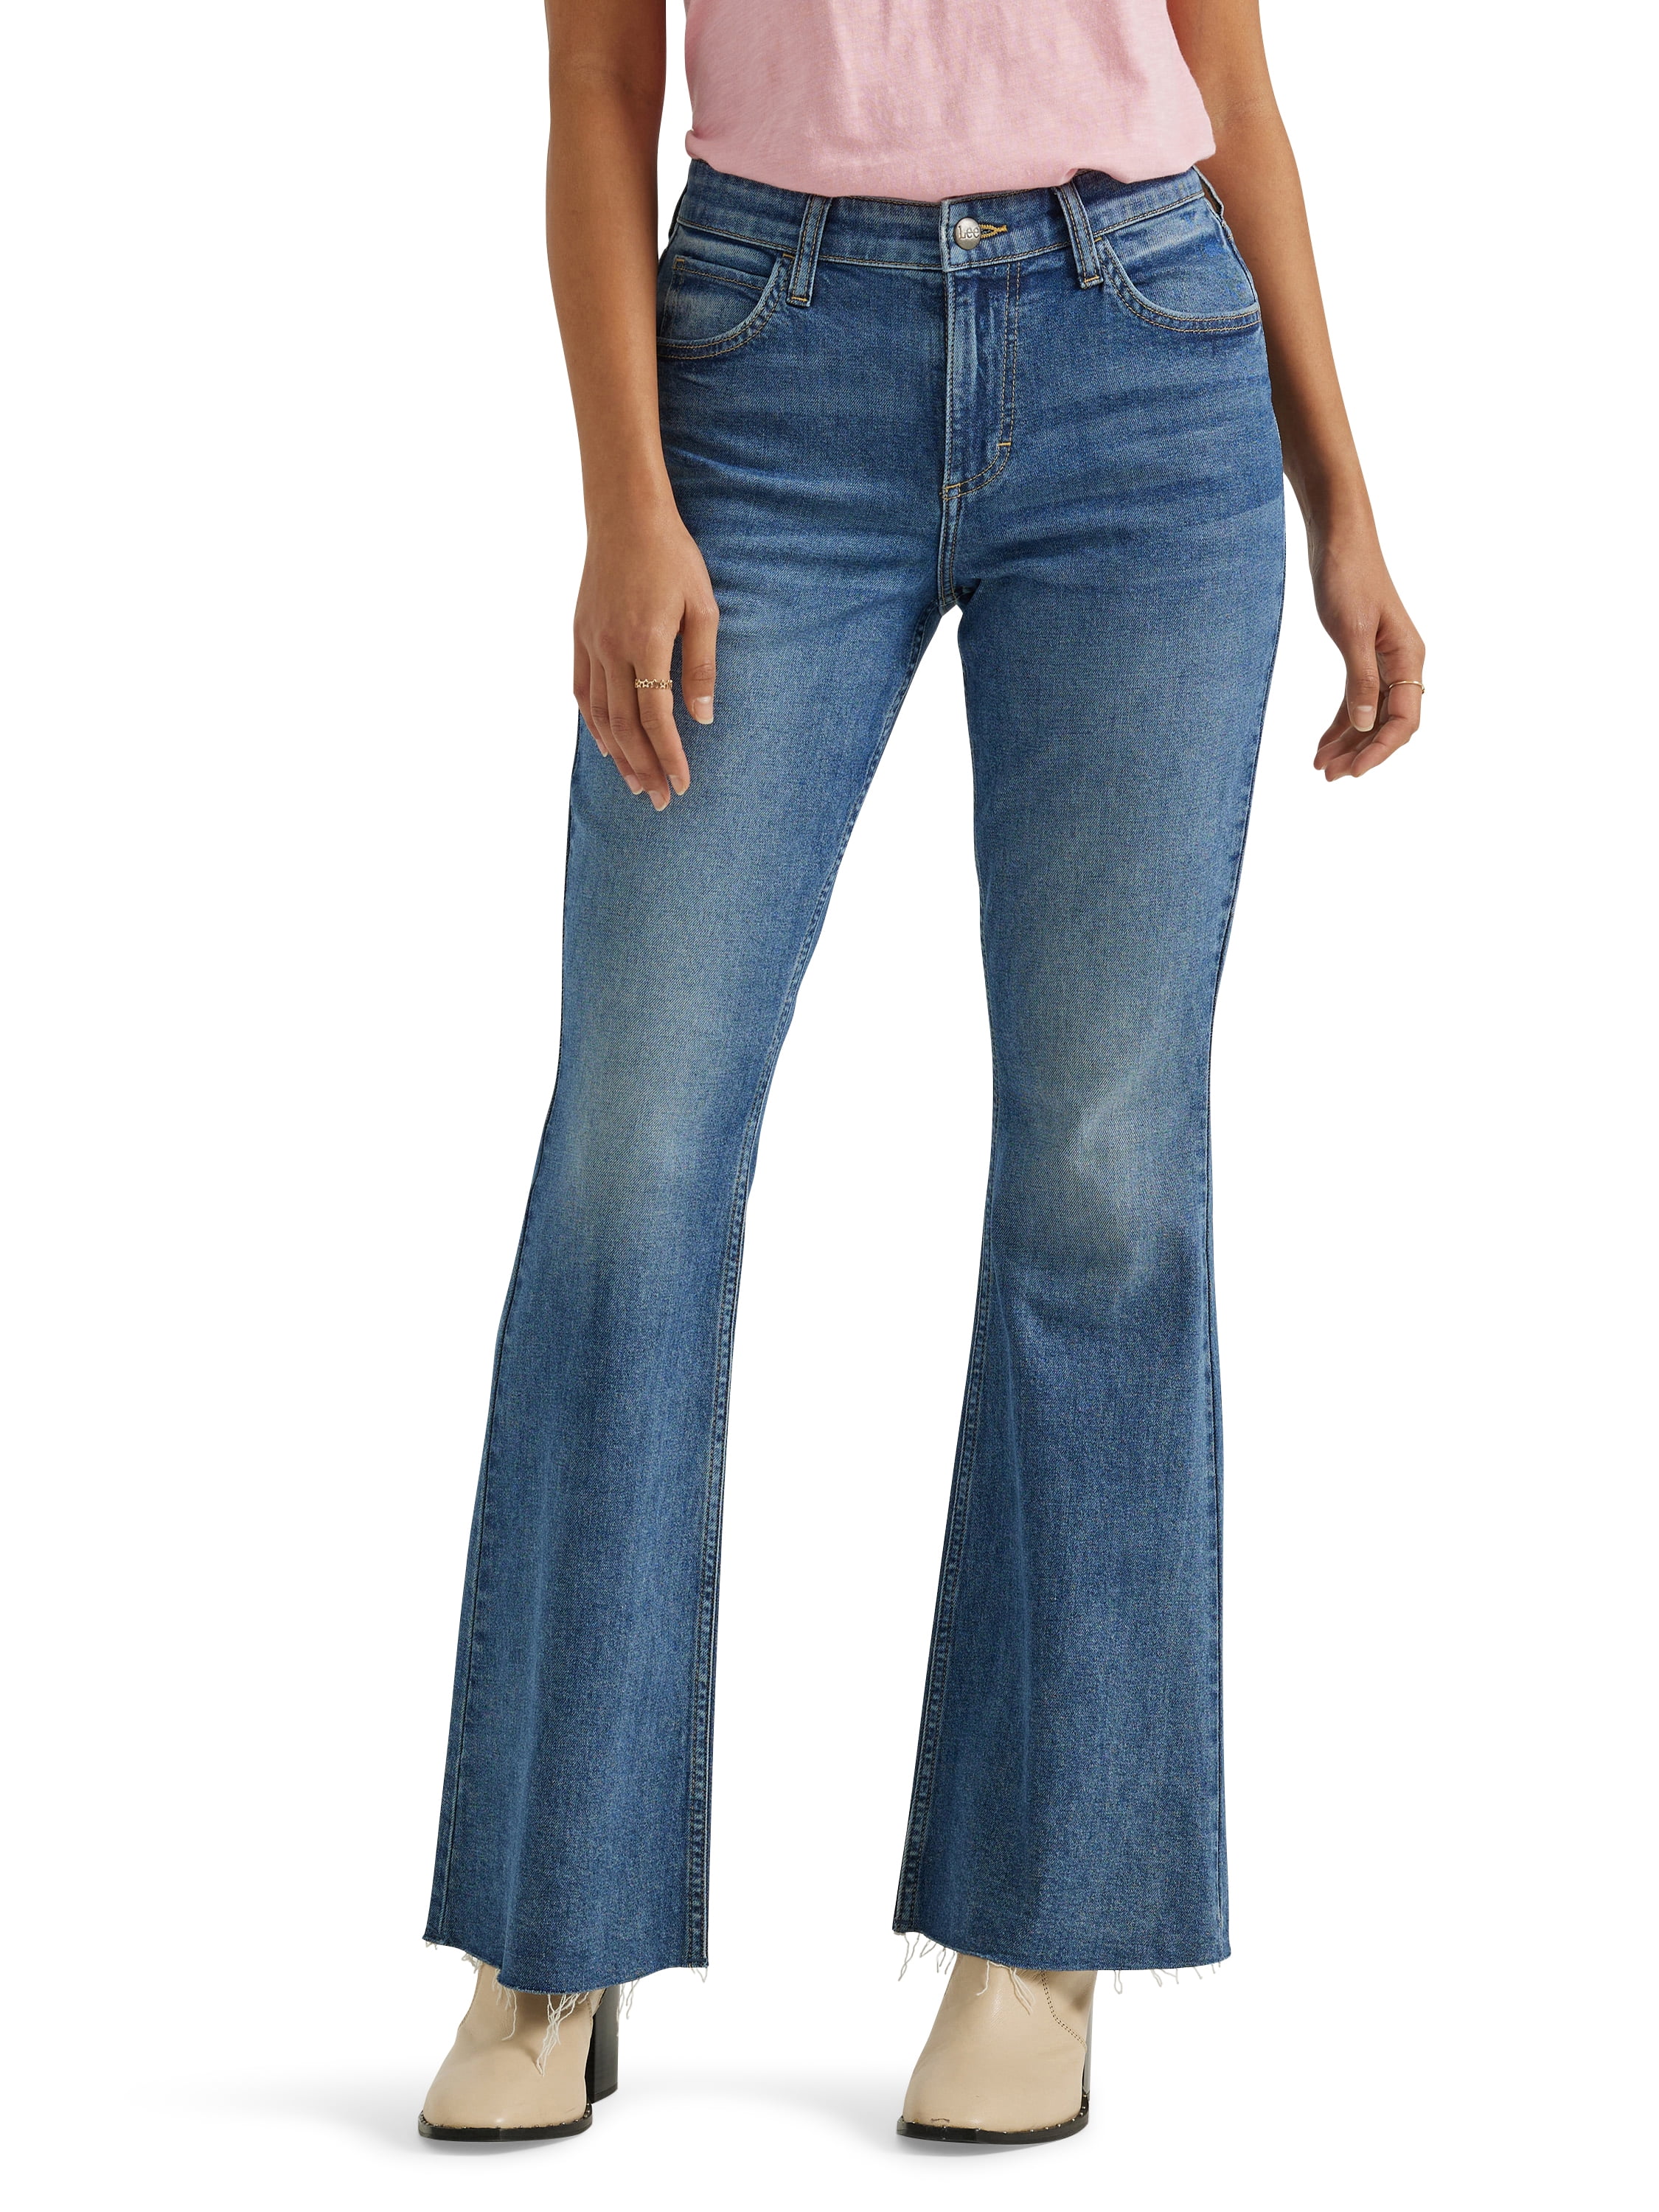 Sofia Jeans Women's Melissa Flare Pull On High Rise Jeans, 33.5